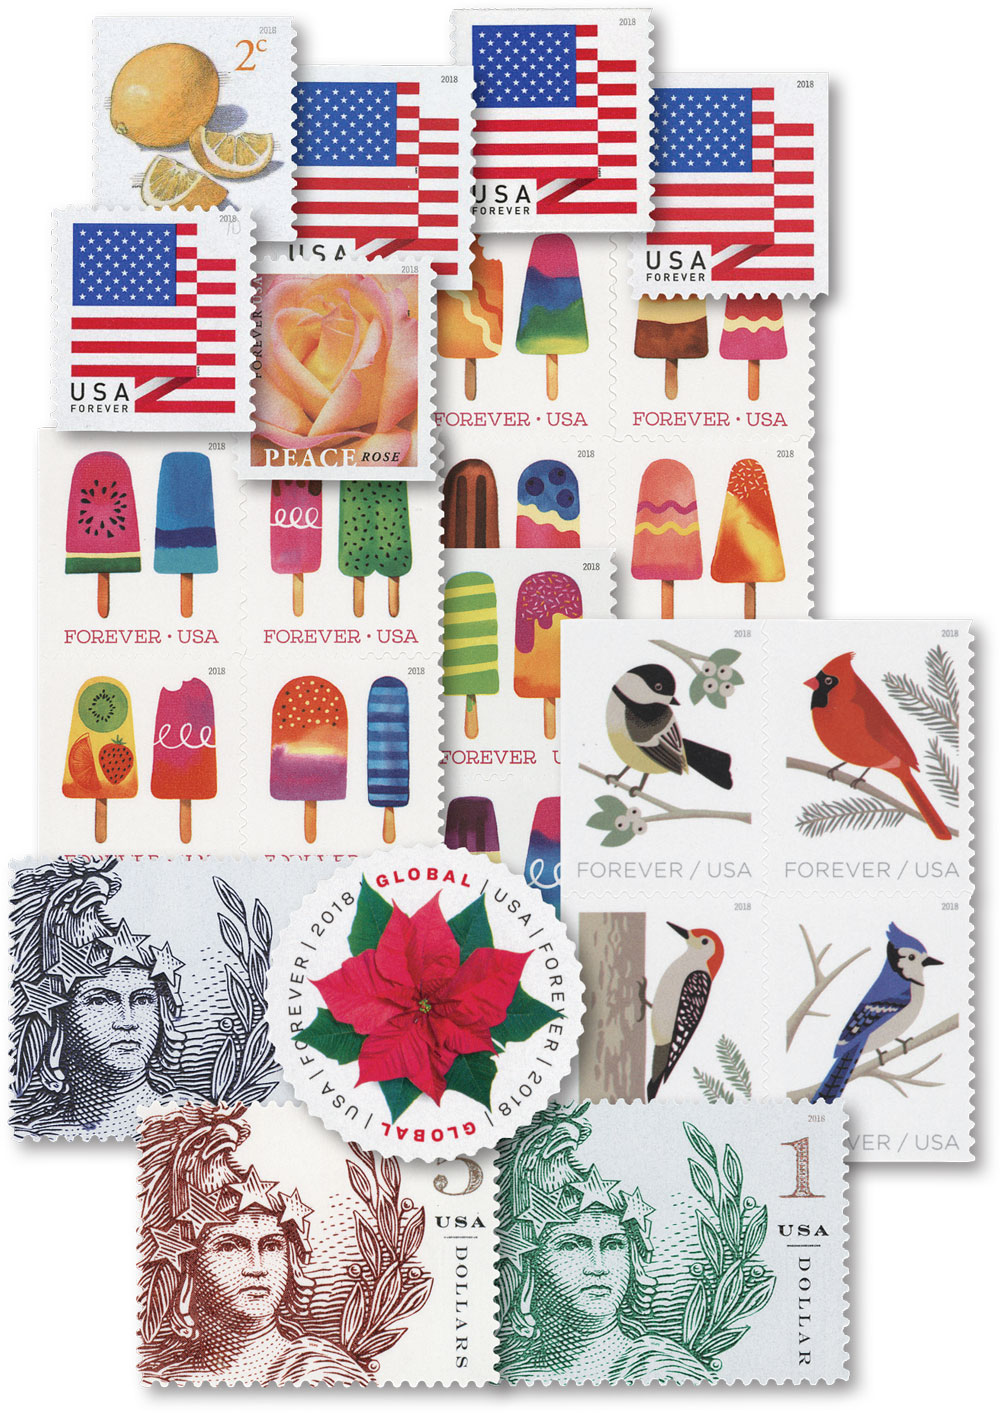 5260 - 2018 First-Class Forever Stamp - US Flag with Micro Print